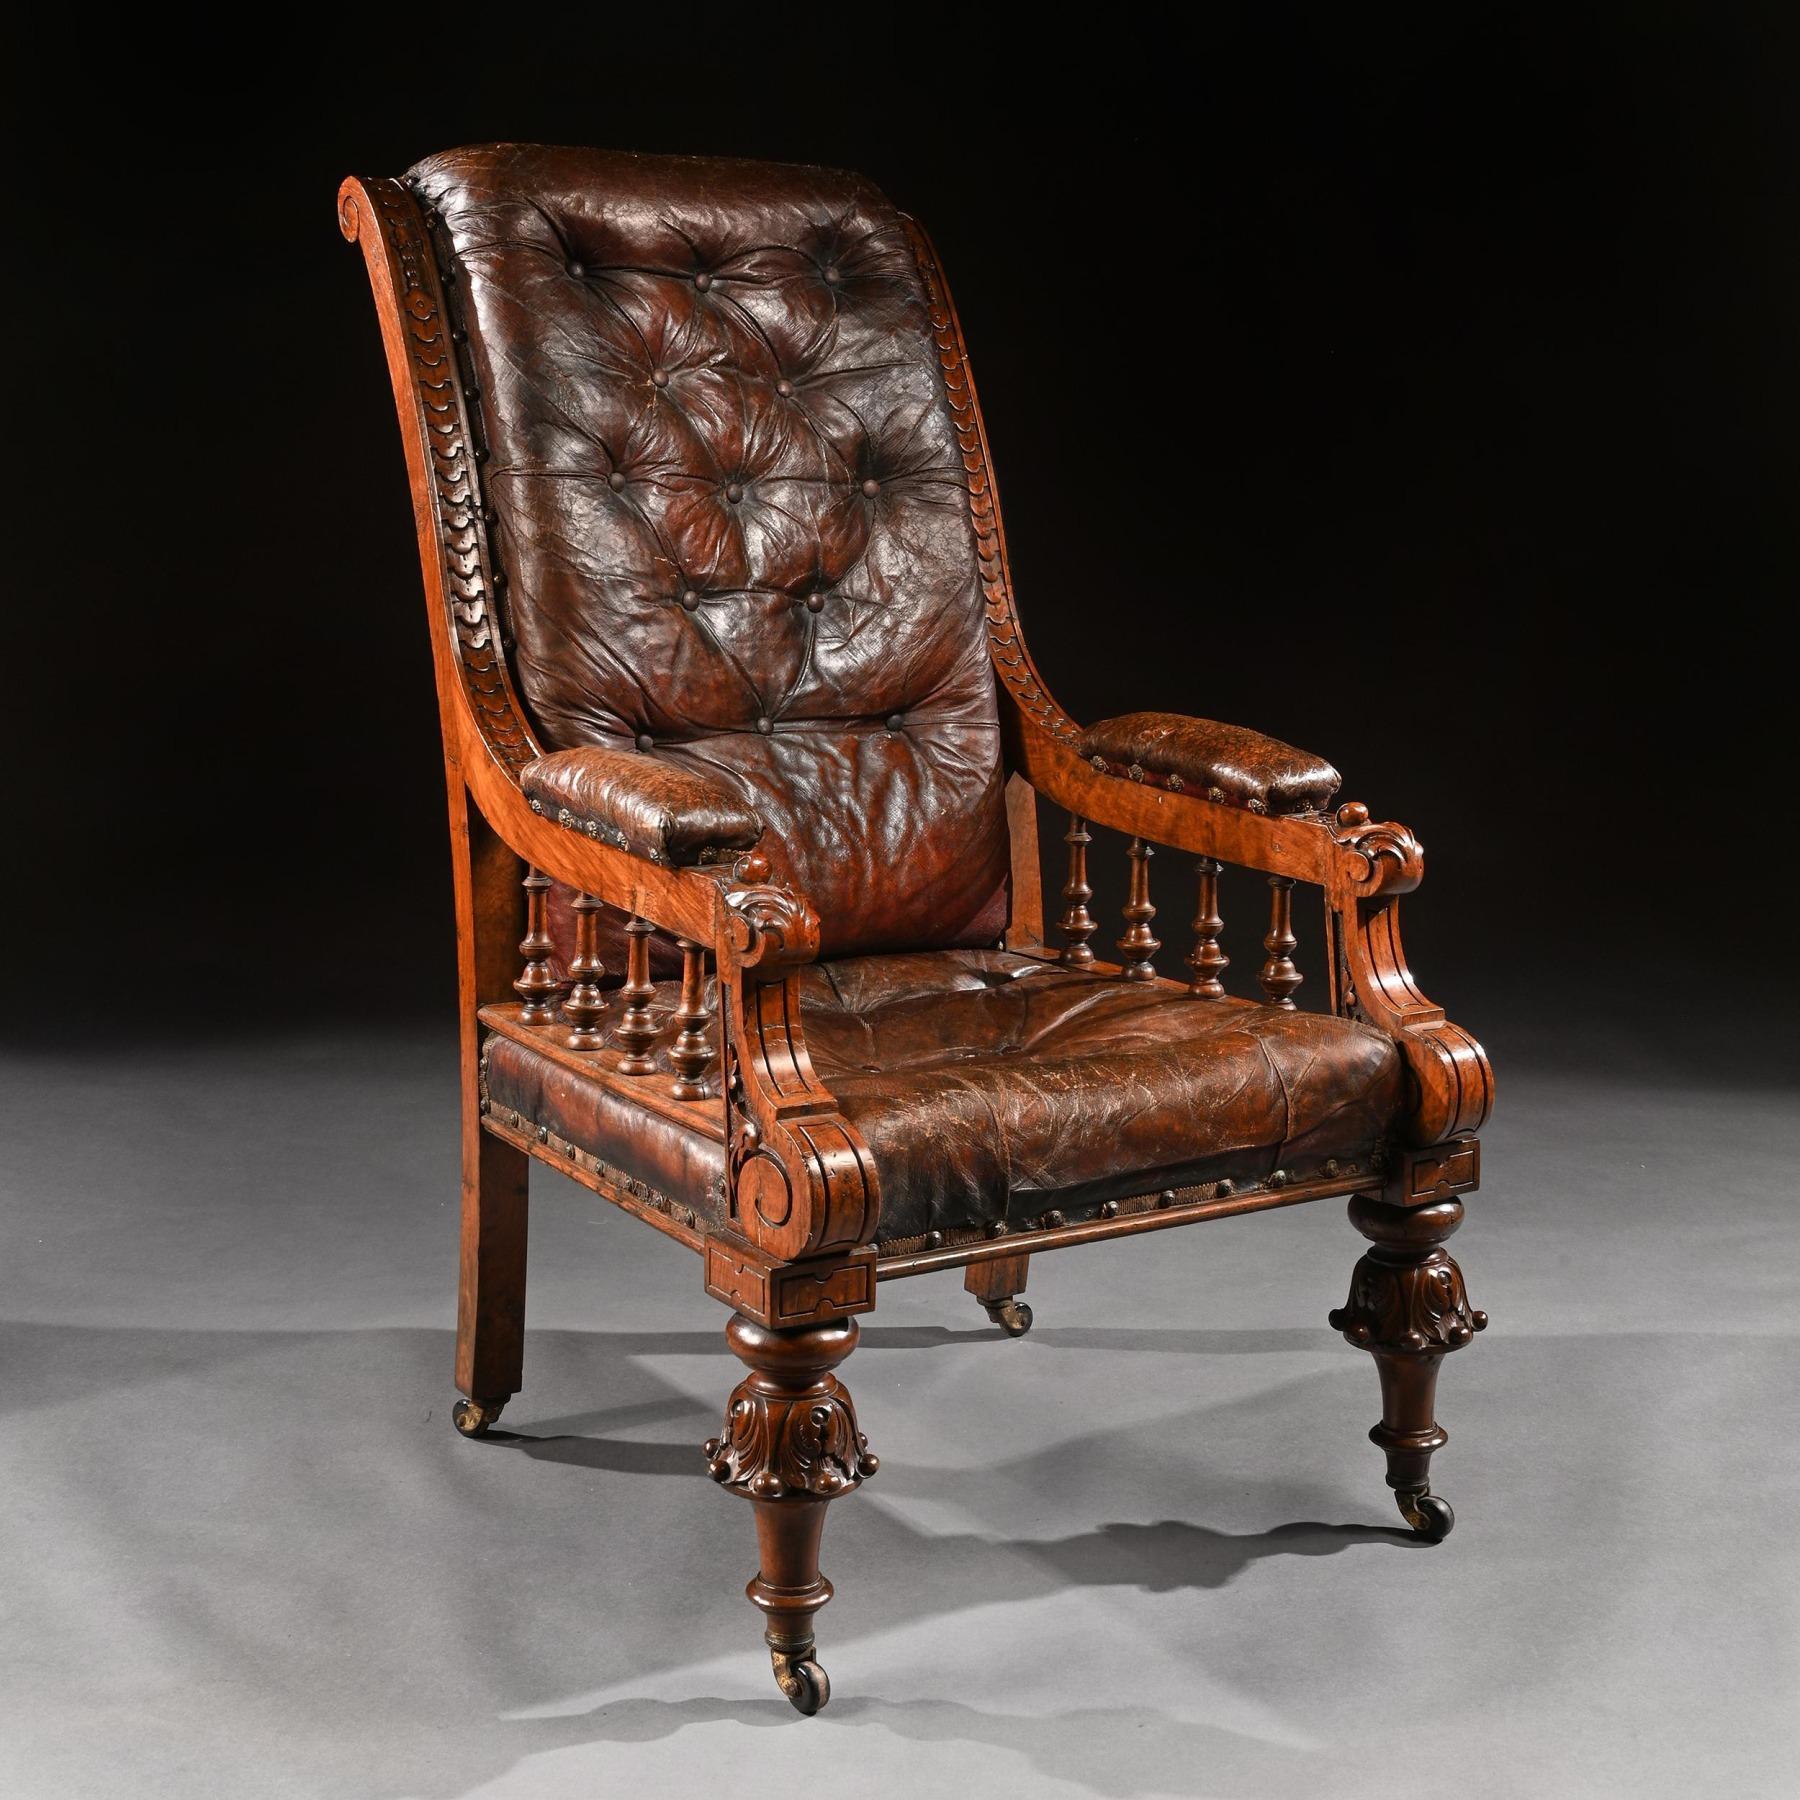 Of grand proportions a 19th century oak armchair retaining its original Moroccan leather upholstery.

English circa 1880.

Standing almost 4 feet tall this imposing chair is in wonderful original condition. Having a scrolled leather deep